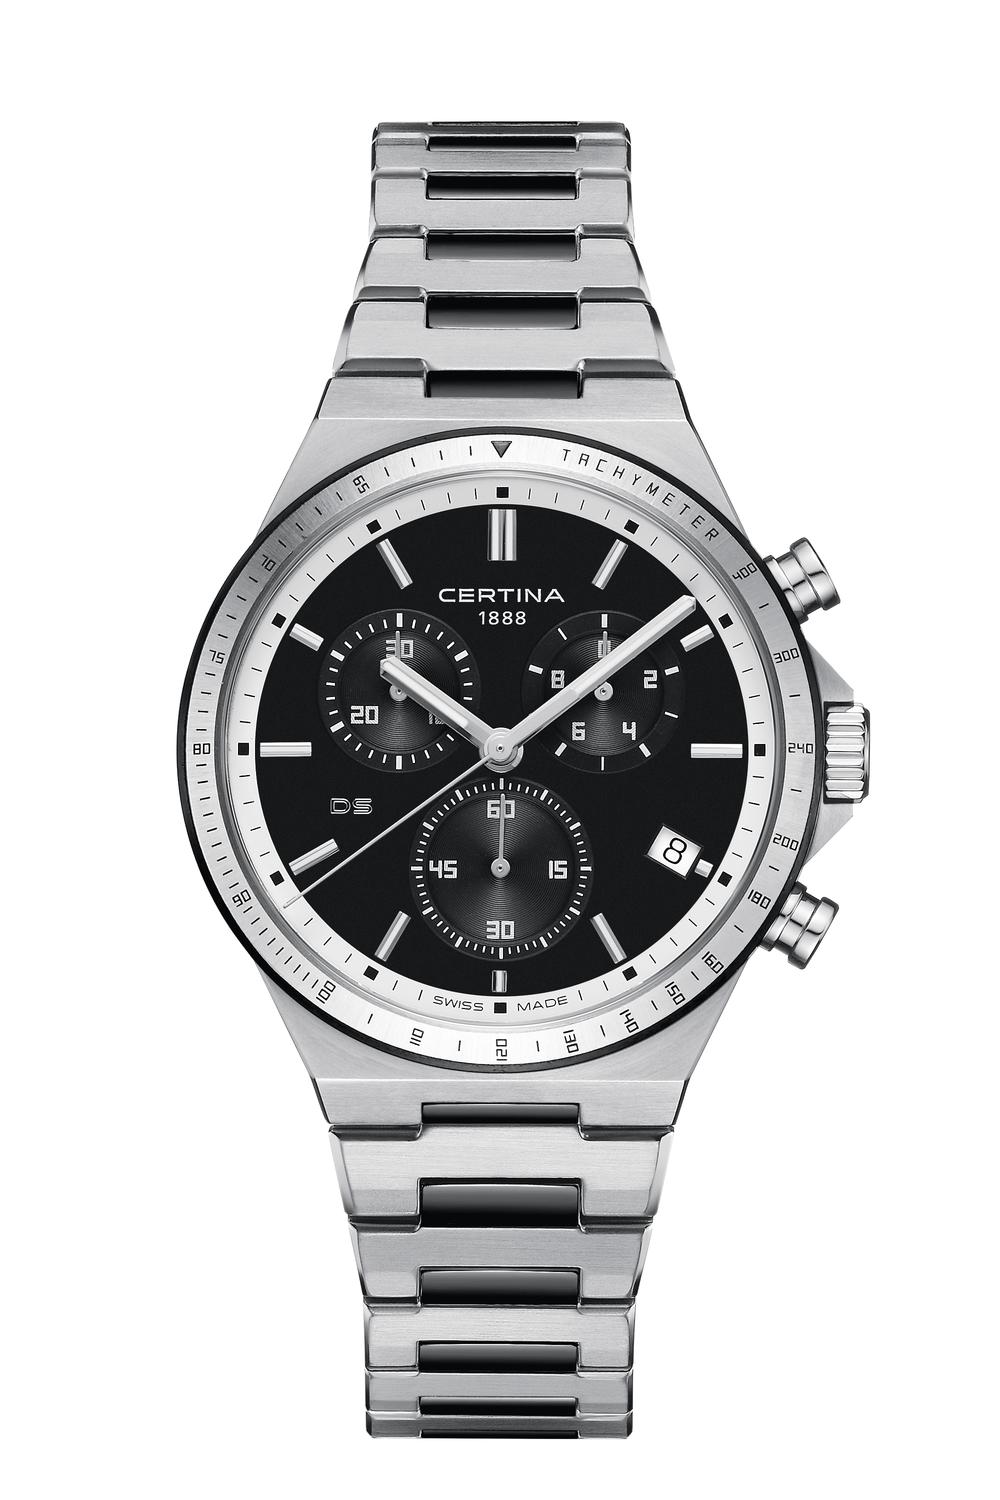 Certina Hopes To Match Success Of Tissot's PRX With Family Of Seventies ...